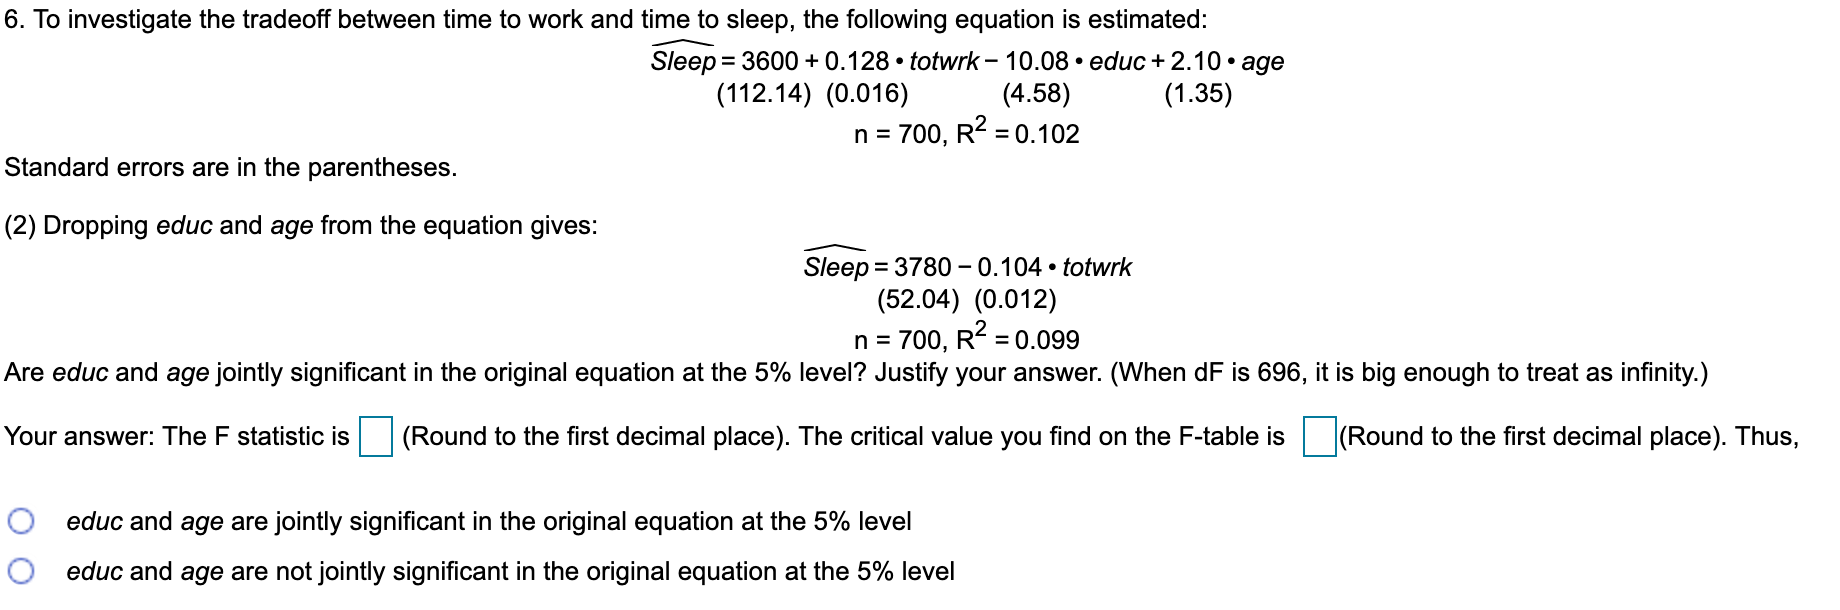 6. To investigate the tradeoff between time to work and time to sleep, the following equation is estimated:
Sleep = 3600 + 0.128 • totwrk – 10.08 • educ + 2.10 • age
(4.58)
700, R2 = 0.102
%3D
(112.14) (0.016)
(1.35)
Standard errors are in the parentheses.
(2) Dropping educ and age from the equation gives:
Sleep = 3780- 0.104 • totwrk
(52.04) (0.012)
n = 700, R = 0.099
%3D
Are educ and age jointly significant in the original equation at the 5% level? Justify your answer. (When dF is 696, it is big enough to treat as infinity.)
Your answer: The F statistic is (Round to the first decimal place). The critical value you find on the F-table is (Round to the first decimal place). Thus,
educ and age are jointly significant in the original equation at the 5% level
educ and age are not jointly significant in the original equation at the 5% level
